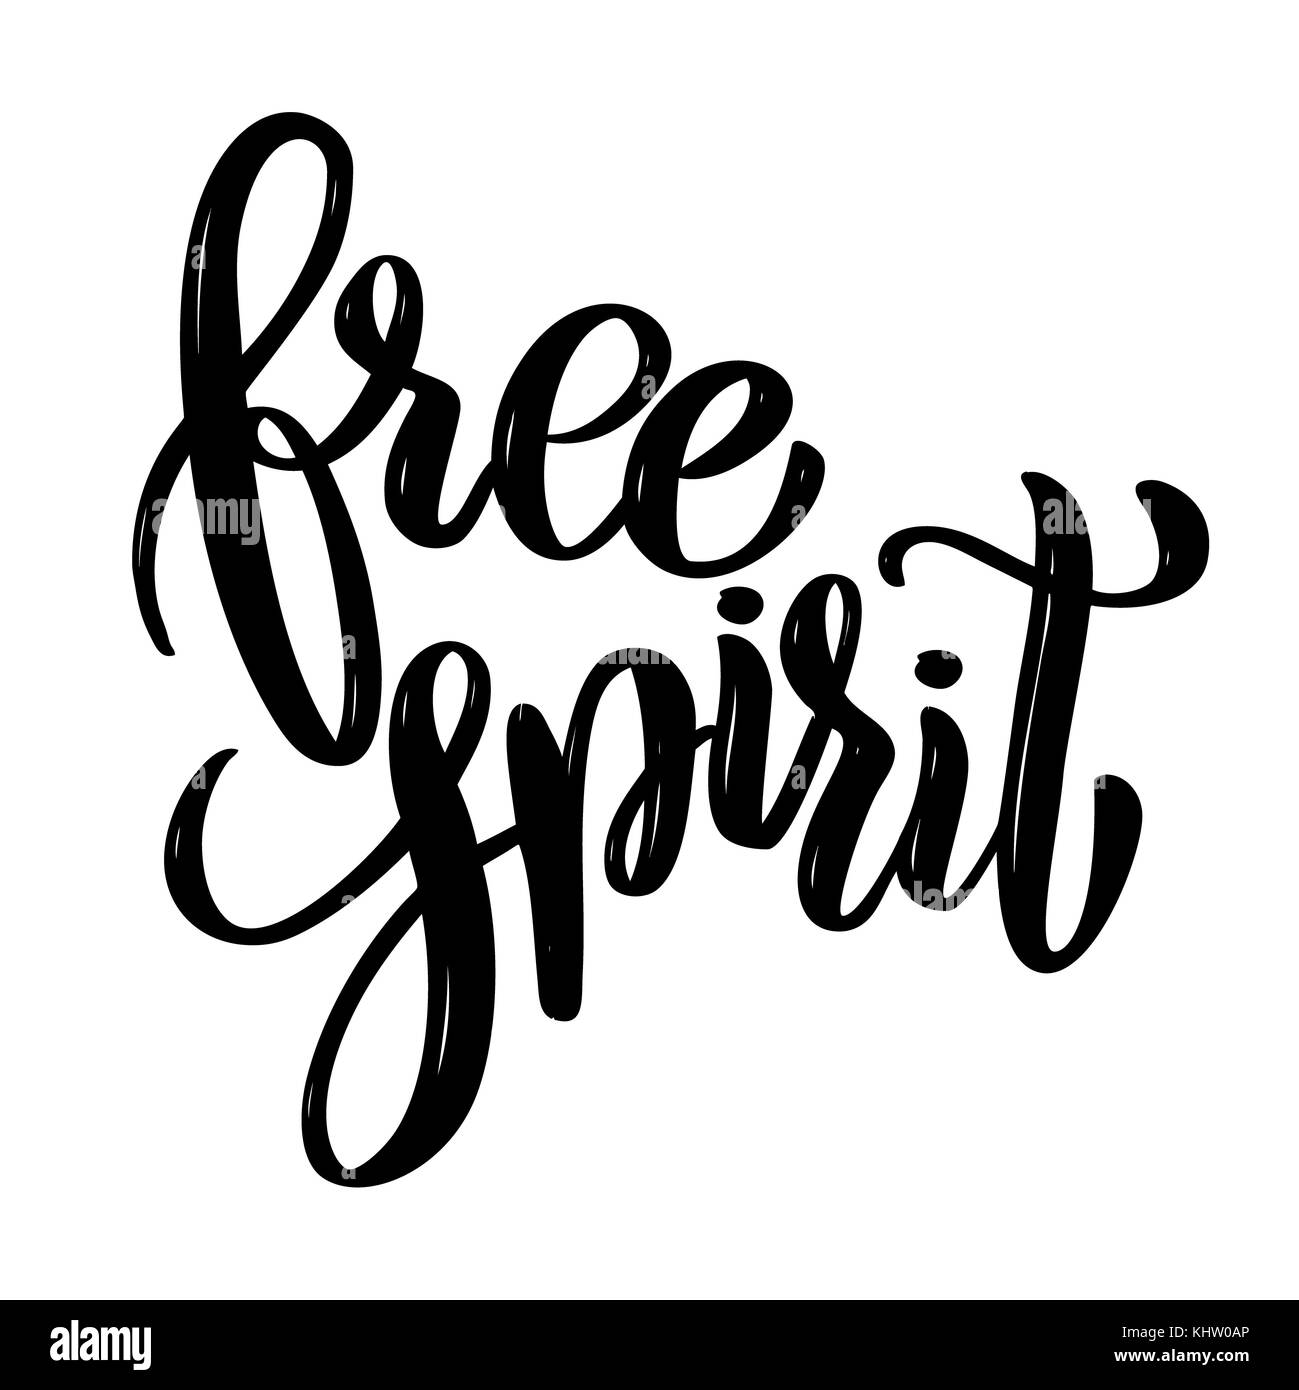 Free spirit Hand drawn motivation lettering quote. Design element for poster, banner, greeting card. Vector illustration Stock Photo